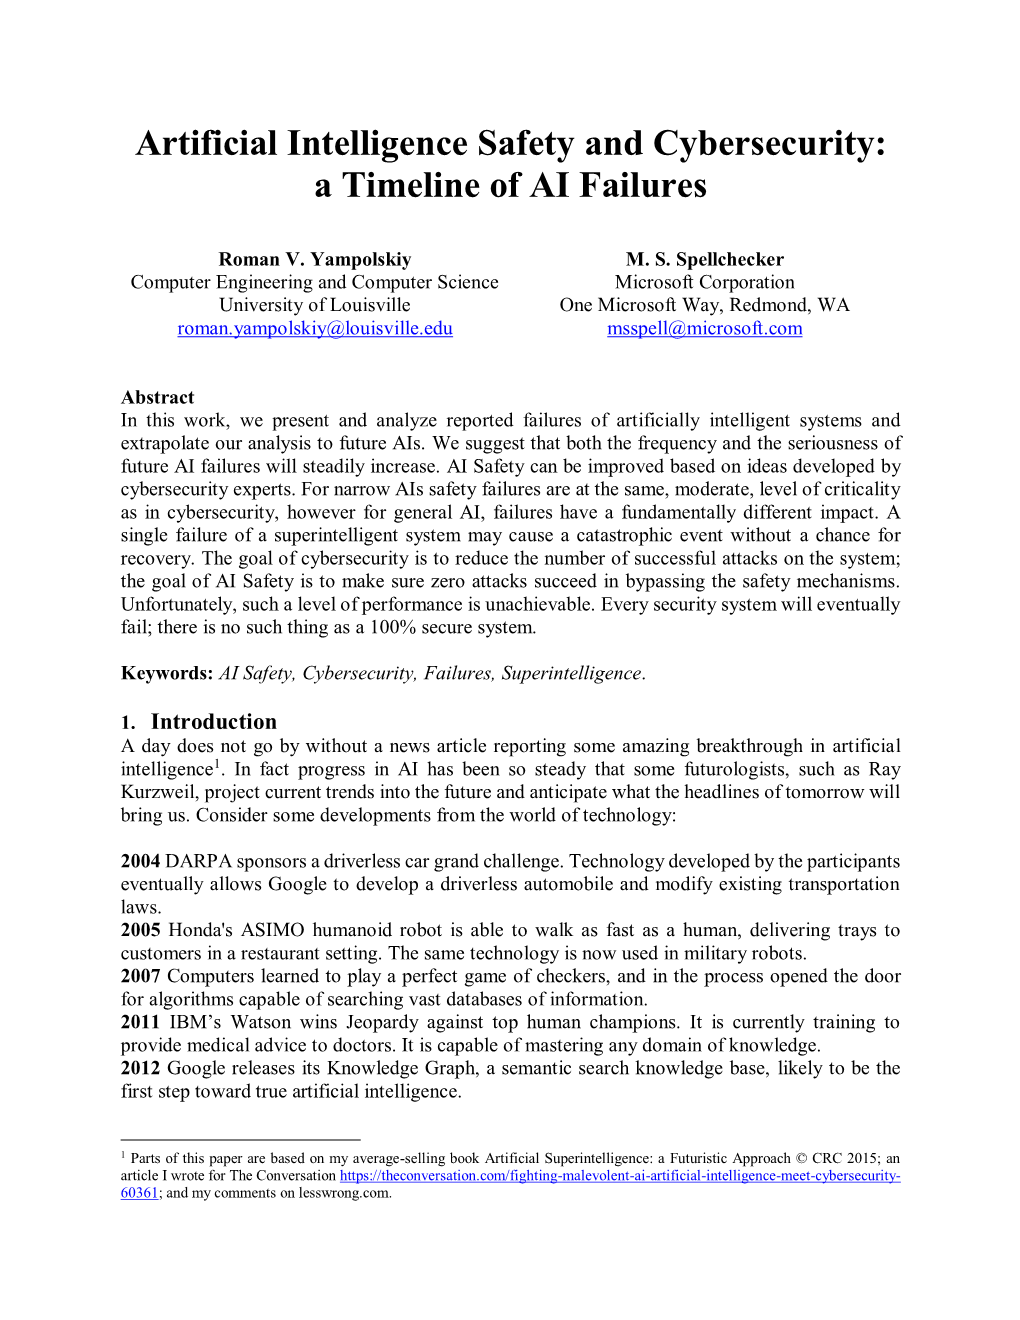 Artificial Intelligence Safety and Cybersecurity: a Timeline of AI Failures